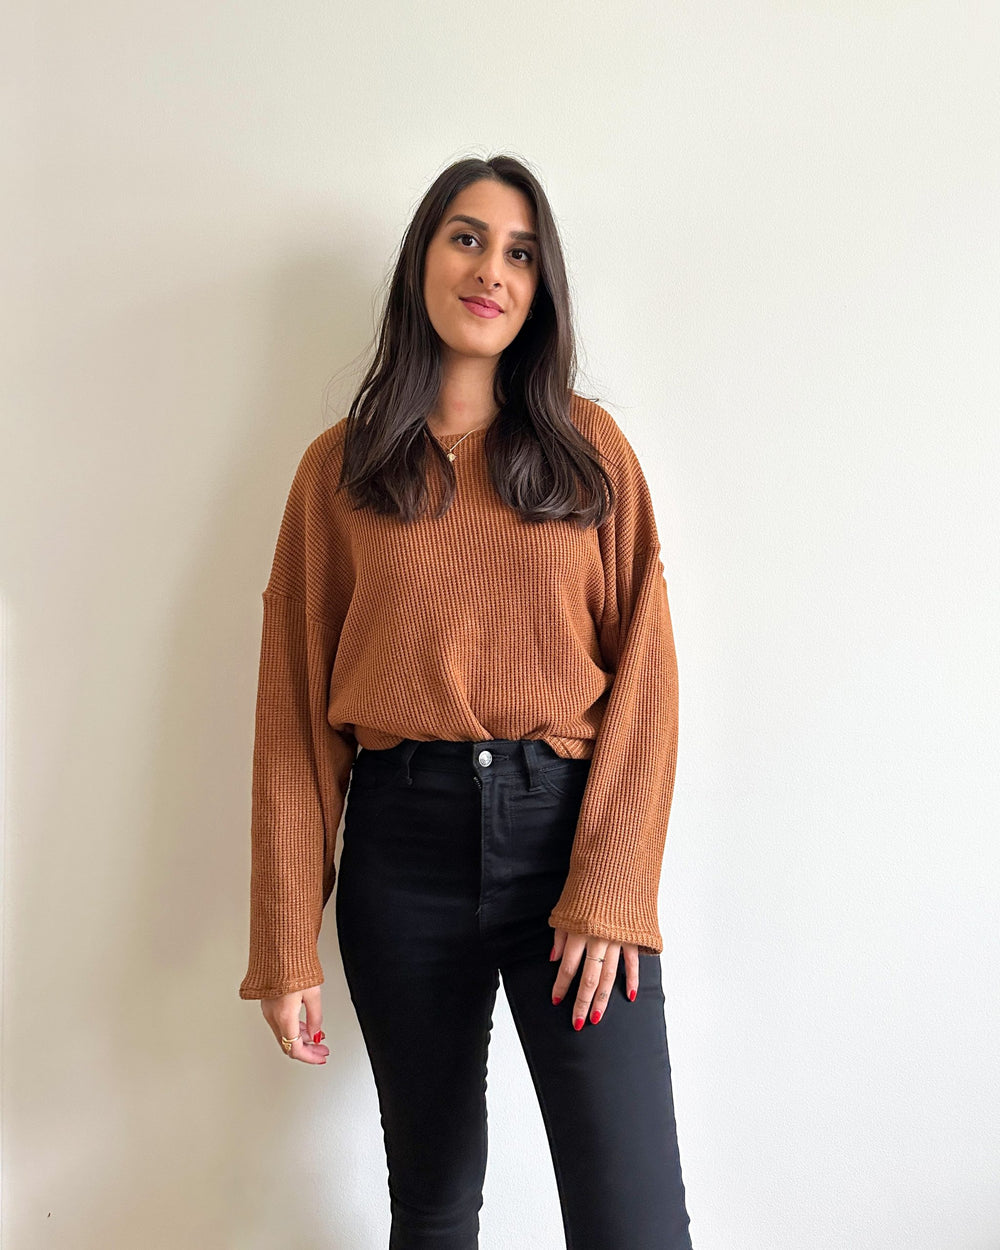 Woman wearing the Mila Jumper sewing pattern from Tammy Handmade on The Fold Line. A jumper pattern made in jersey, ribbed knit, fleece, sweatshirt, knit wool blends or jacquard knit fabrics, featuring dolman dropped full length sleeves, slip-on, slouchy 